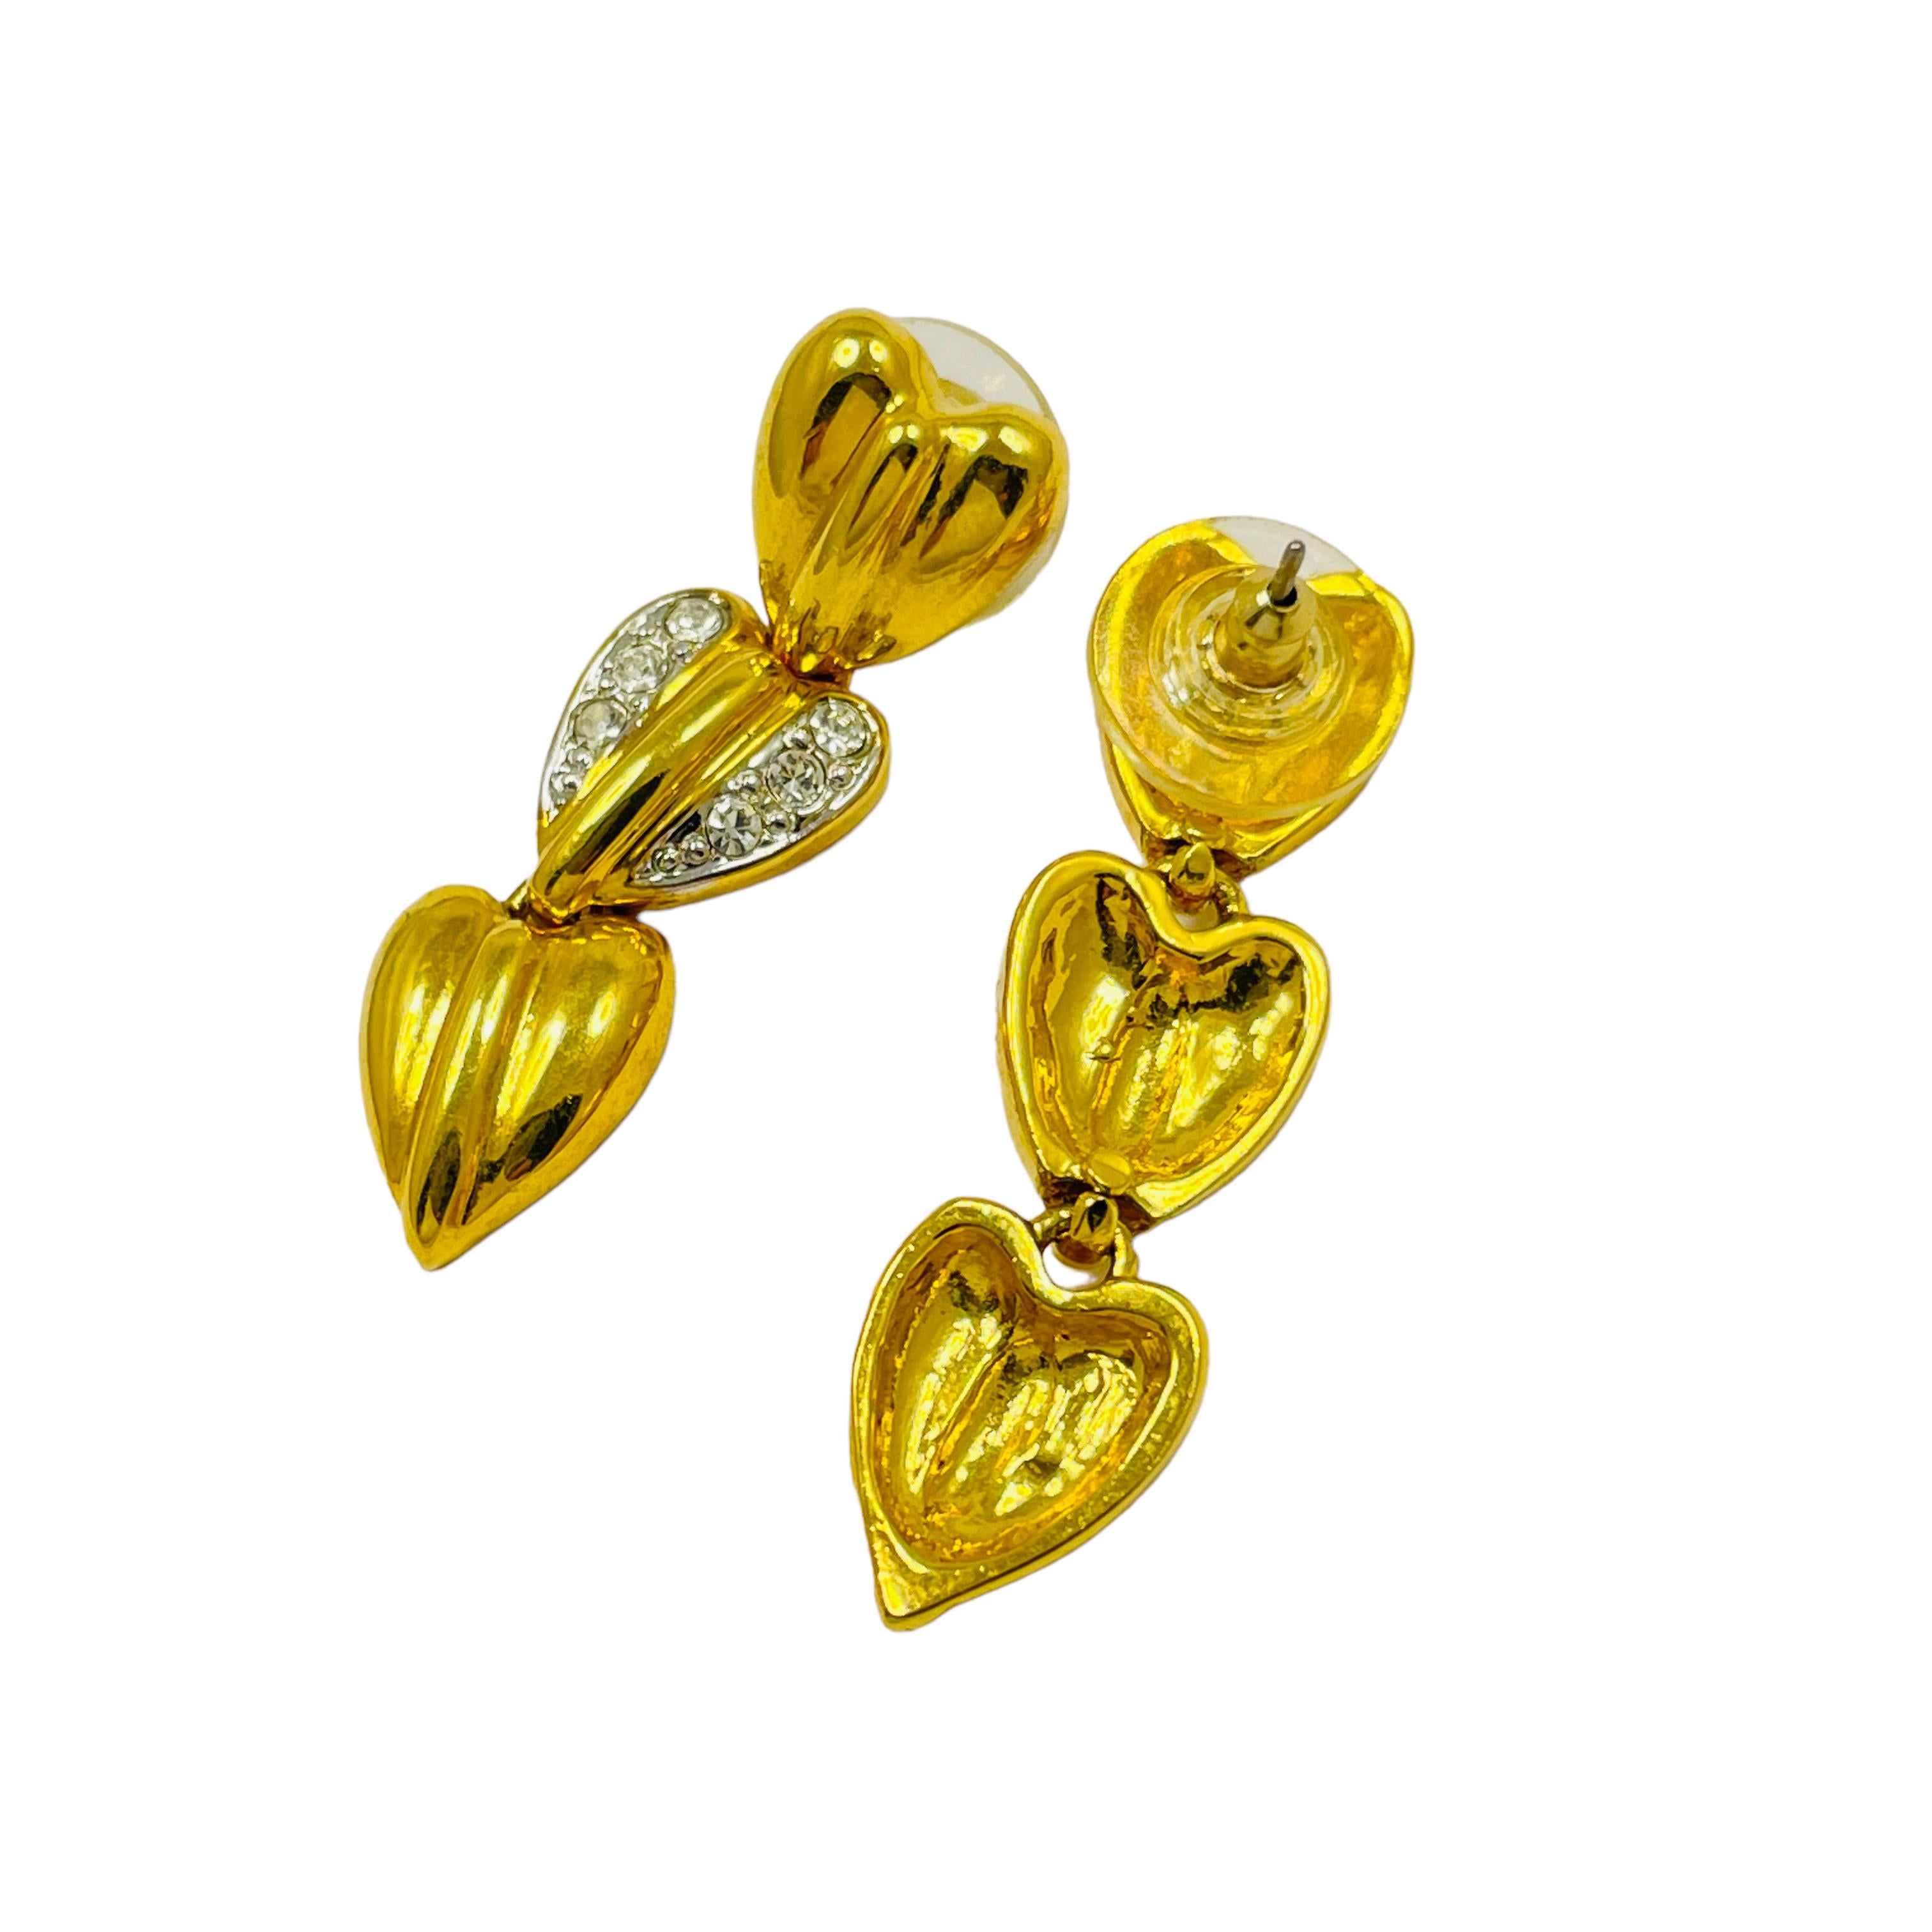 Vintage gold rhinestones dangle hearts designer runway pierced earrings In Good Condition For Sale In Palos Hills, IL